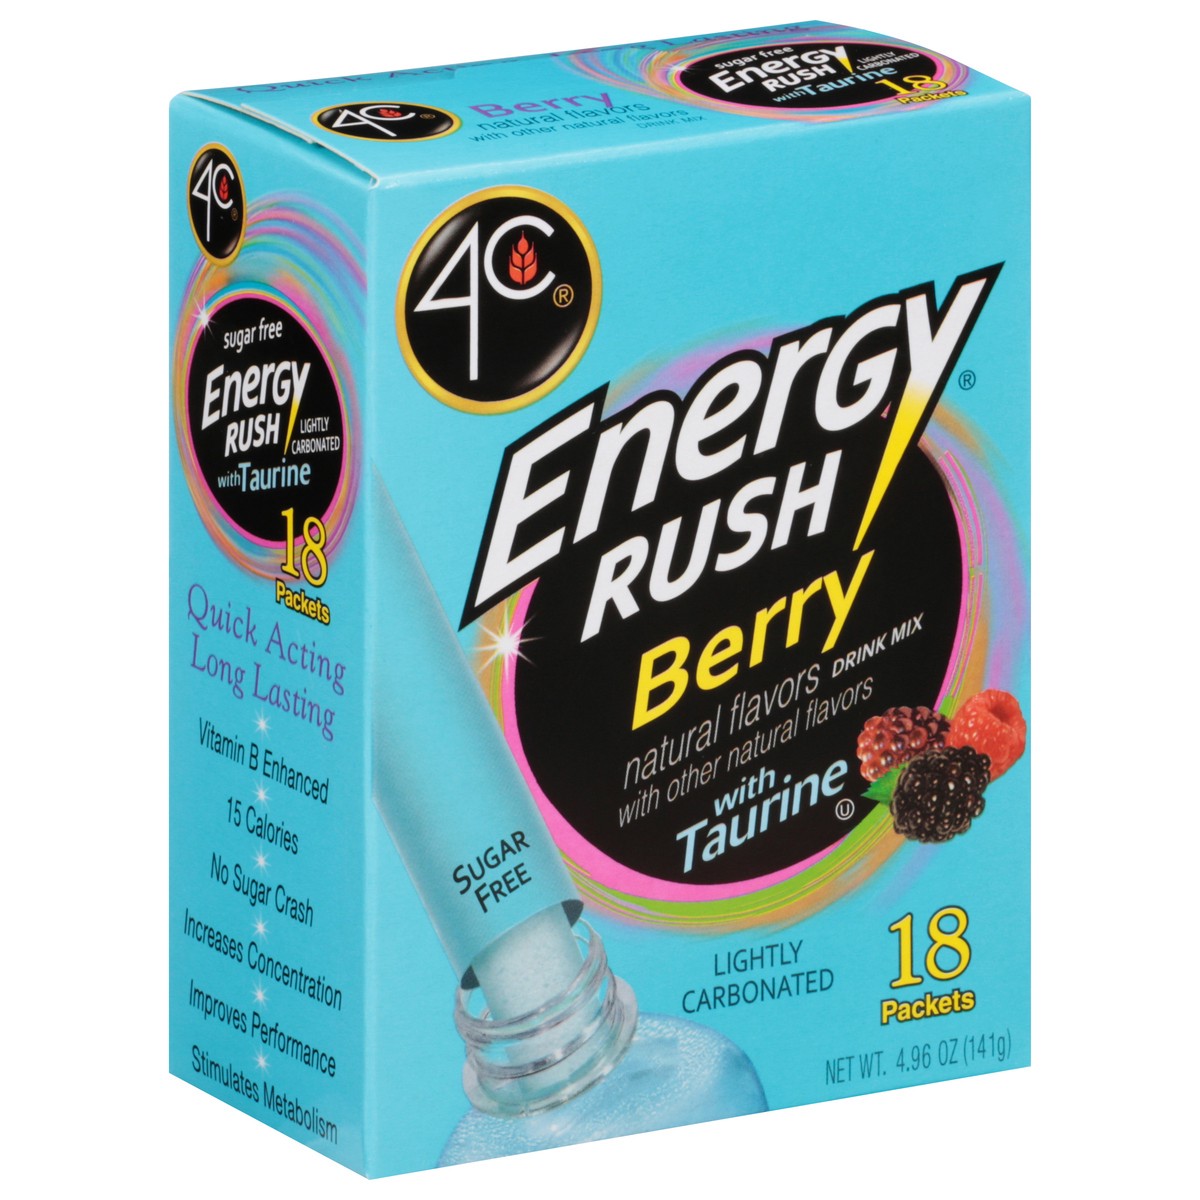 slide 13 of 14, 4C Drink Mix Sgr/Free Energy Rush Be, 18/4.96